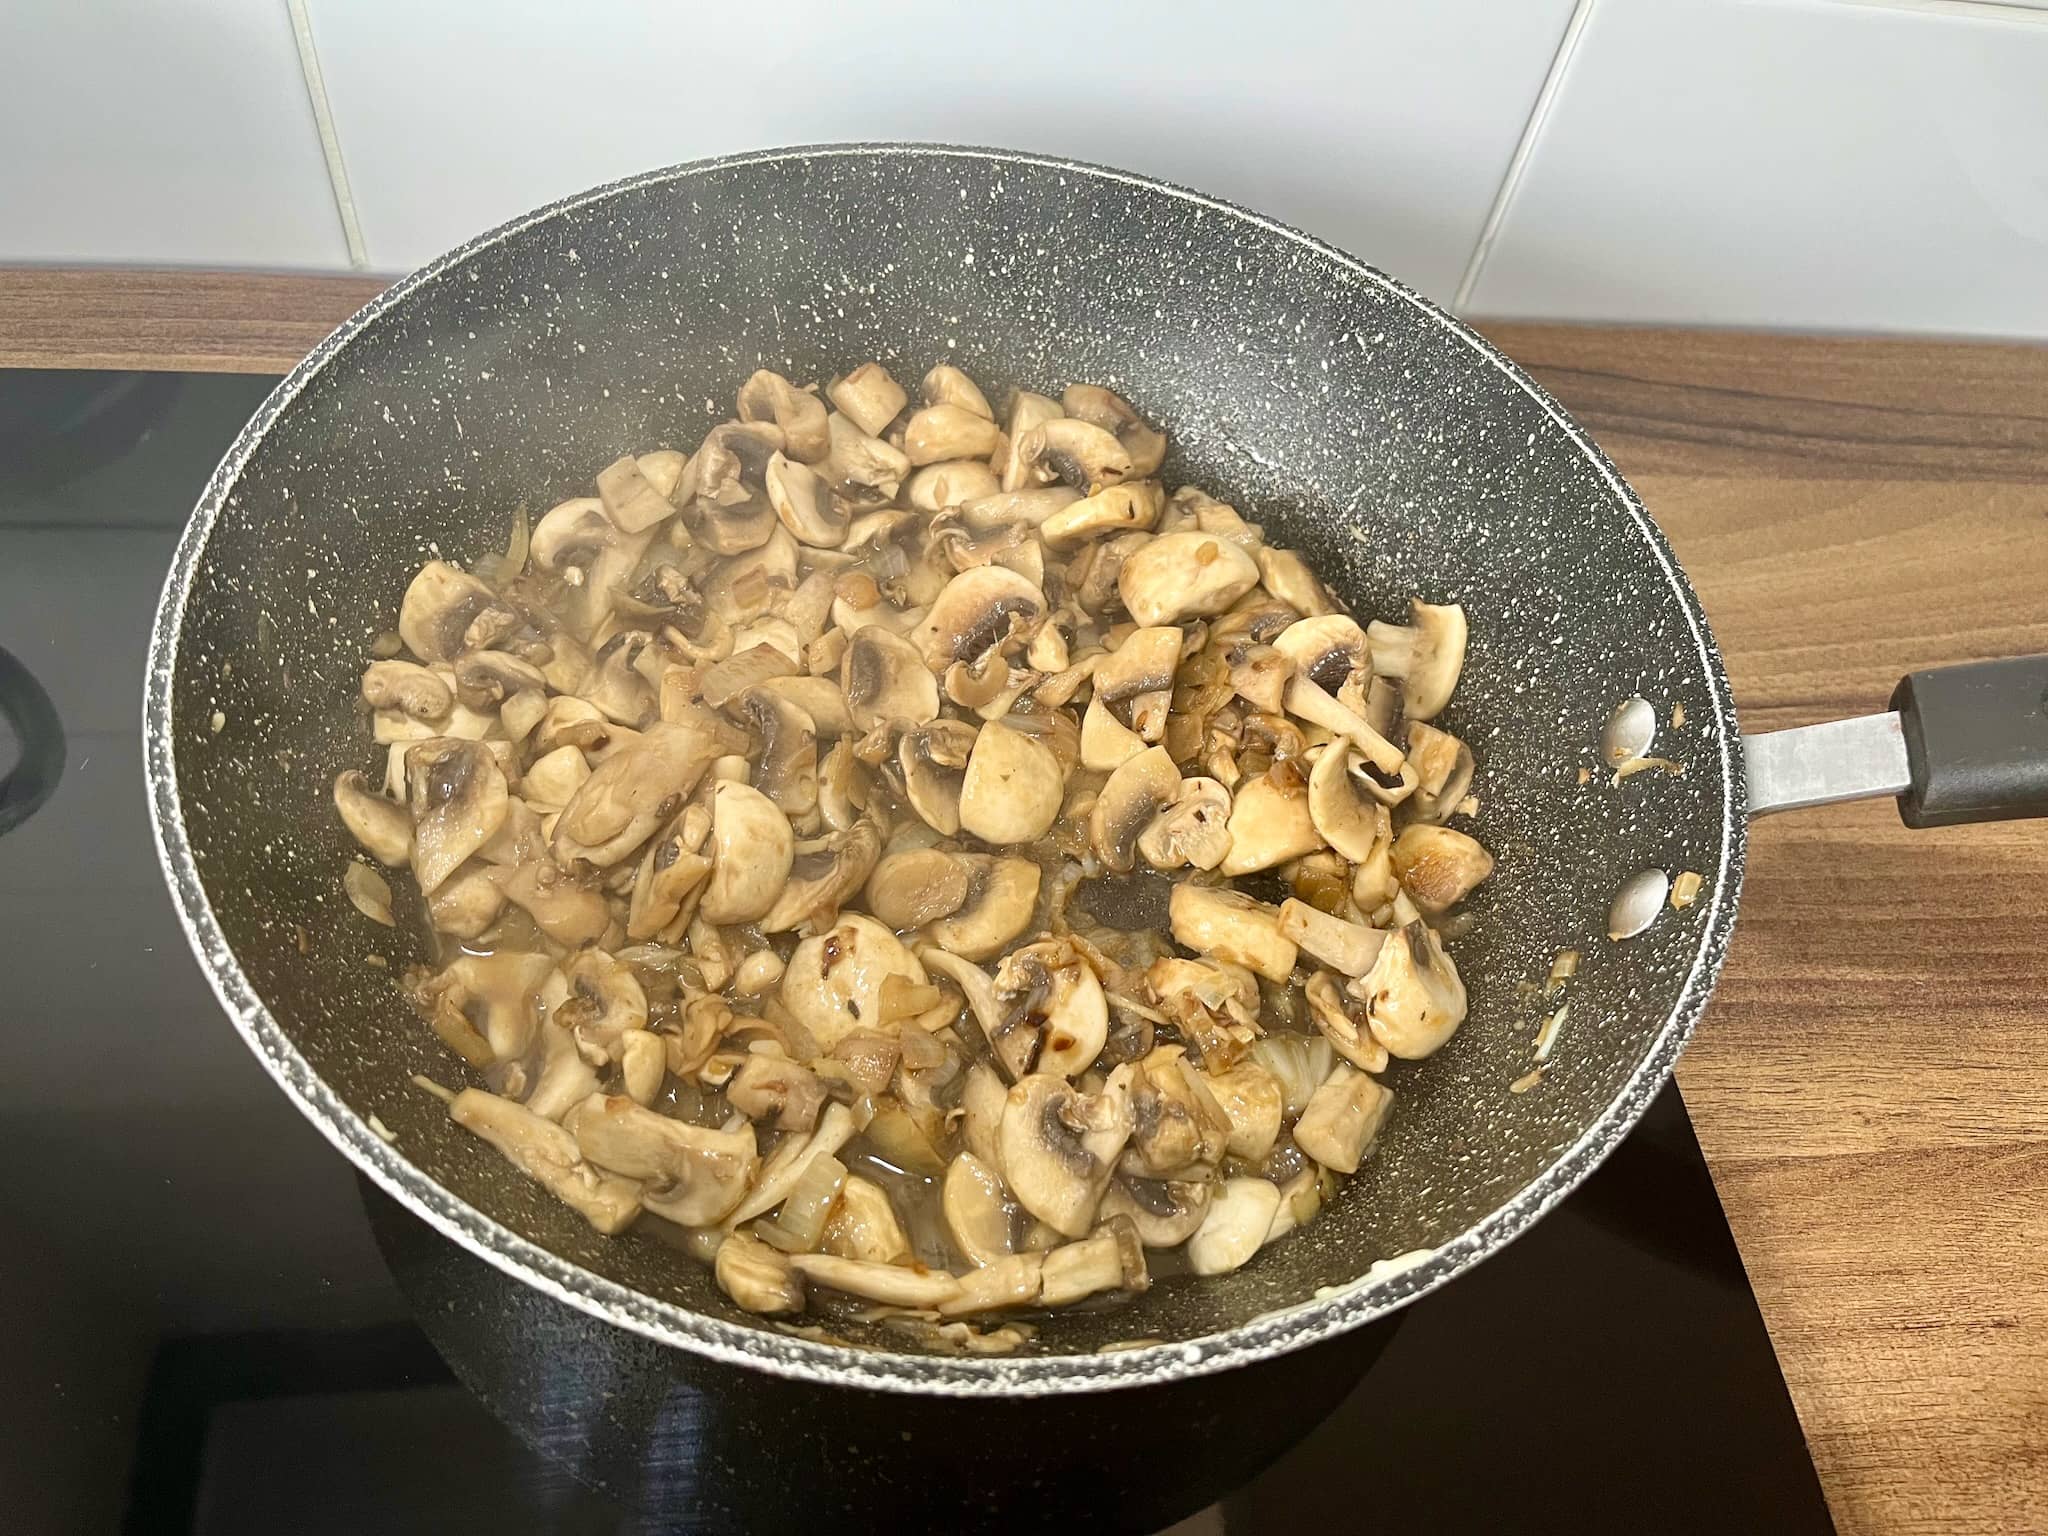 Mushrooms sizzling in a pan